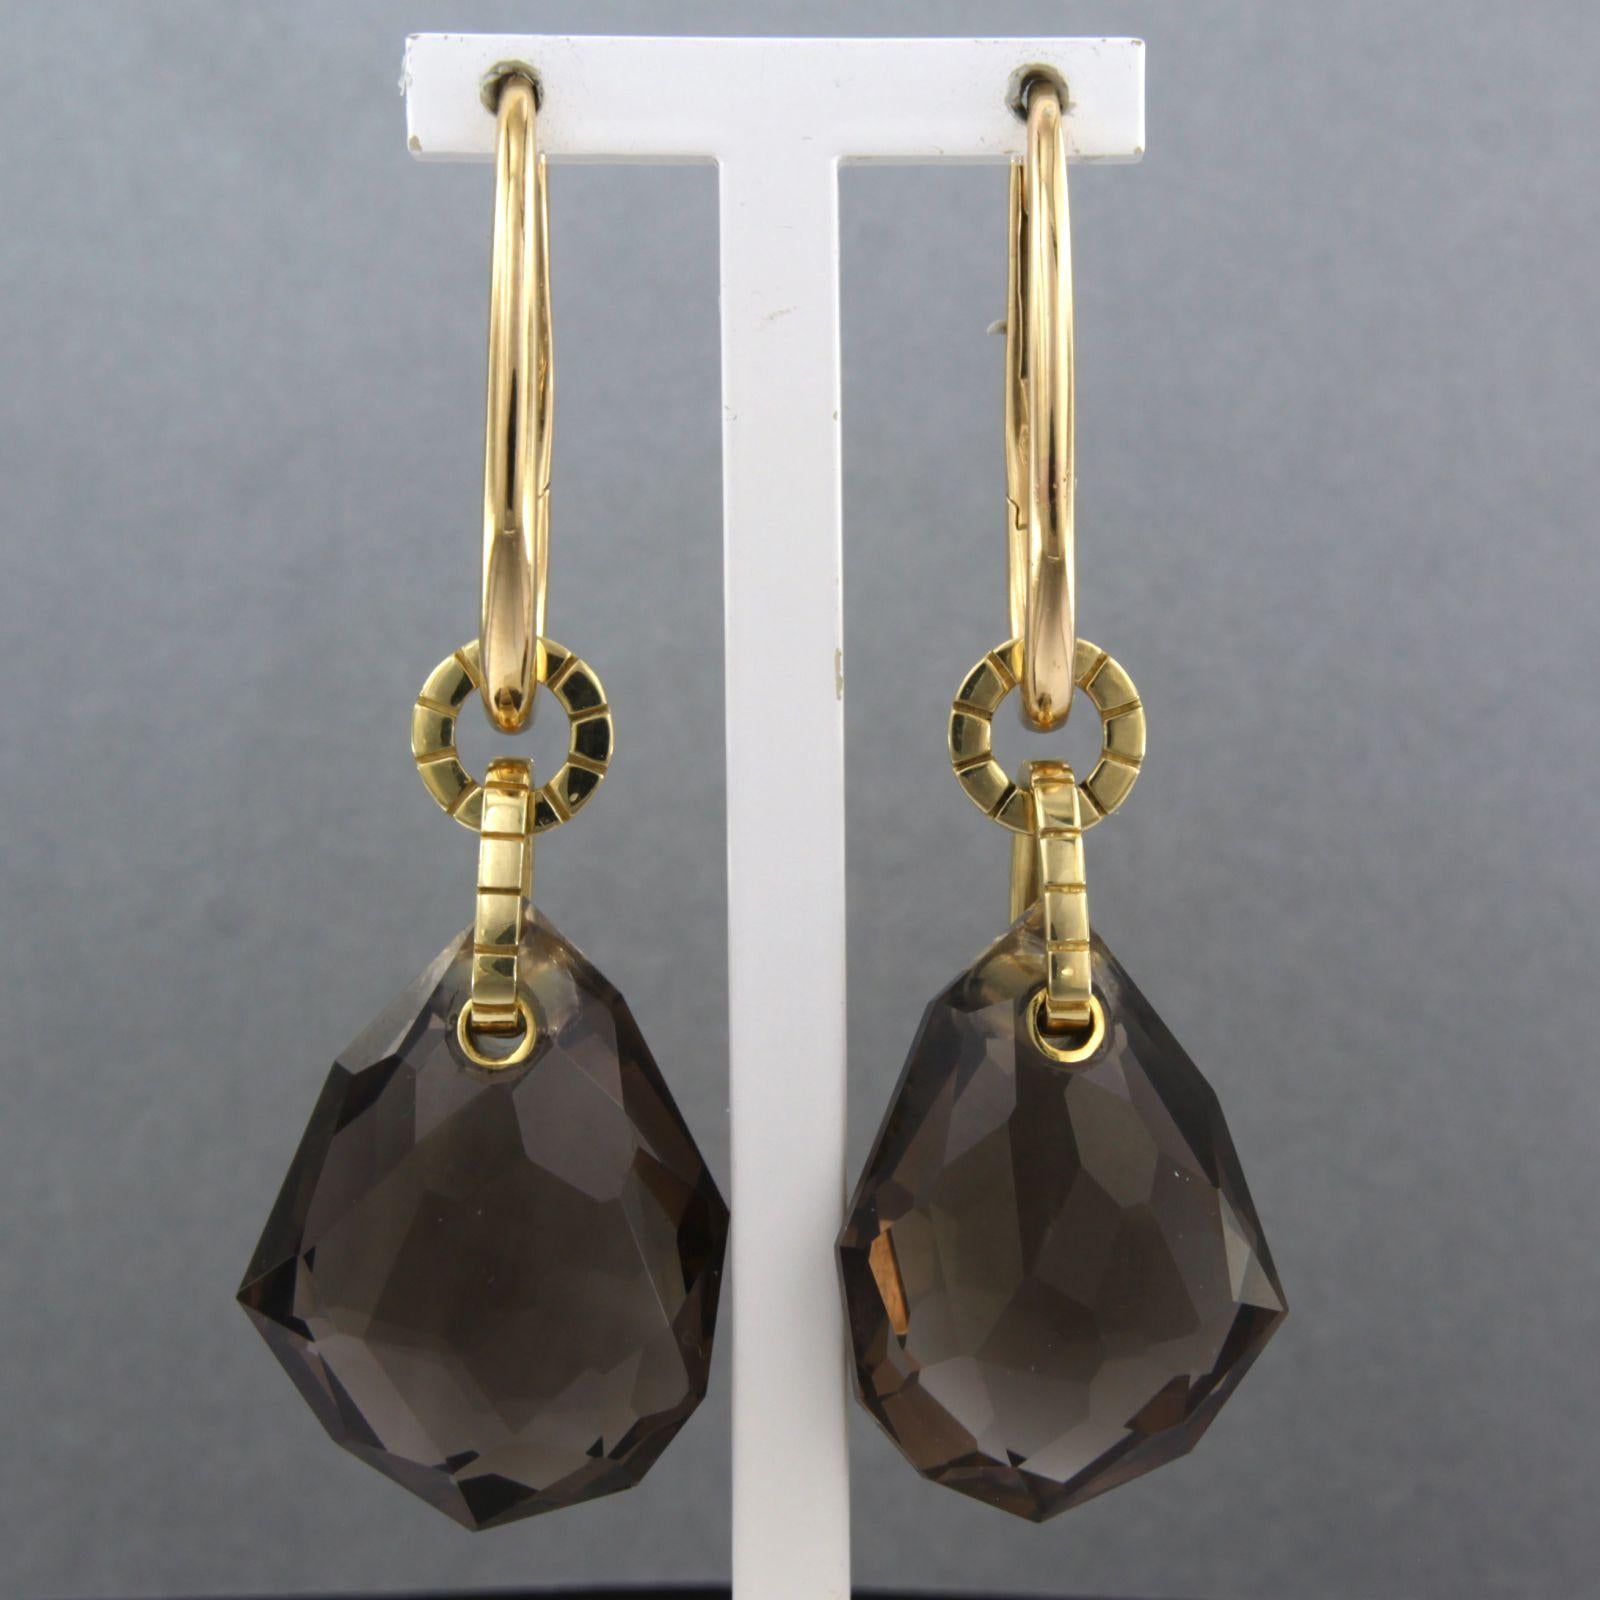 18k yellow gold earrings set with smoky quartz - size 5.5 cm x 2.0 cm

detailed description:

the size of the earring is 5.5 cm long by 2.0 cm wide

weight: 22.7 grams

set with :

- 2 x 2.6 cm x 2.0 cm drop shape facet cut smoky quartz

color: